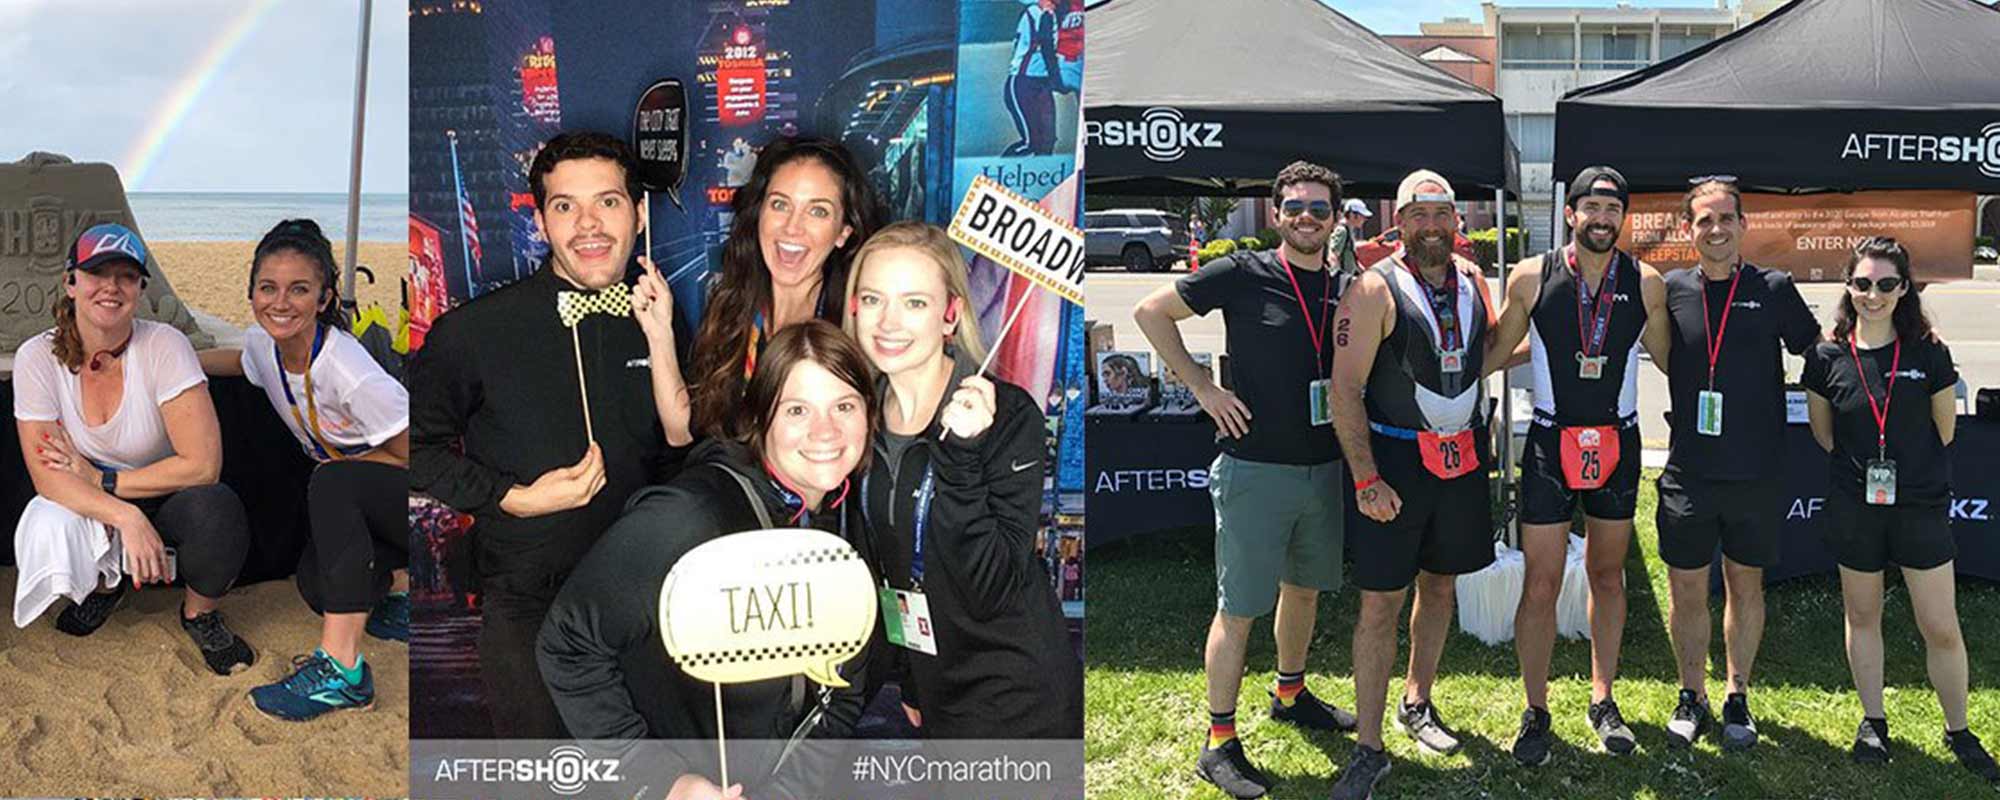 Roadtrip! The AfterShokz Team is Coming to a Race Expo Near You